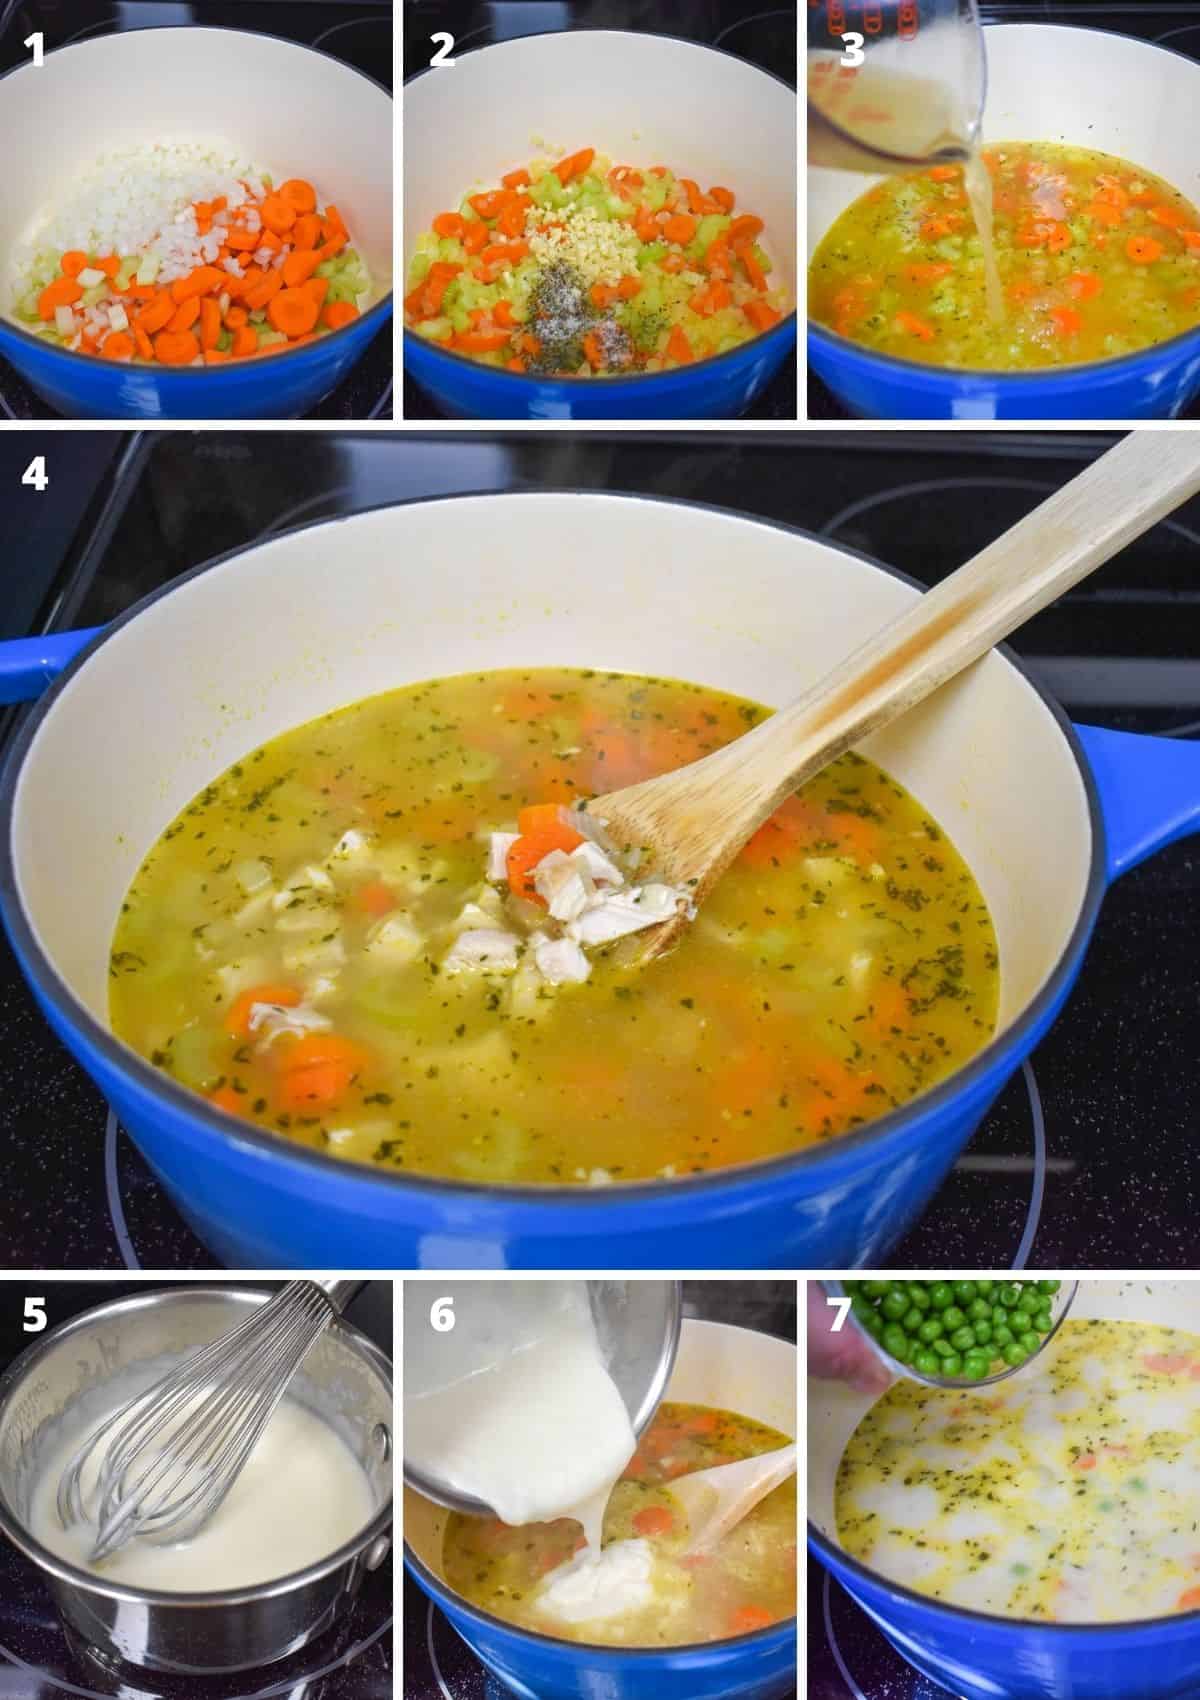 A collage of seven images showing the steps to making the soup. The soup is being made in a blue pot with a white inside.